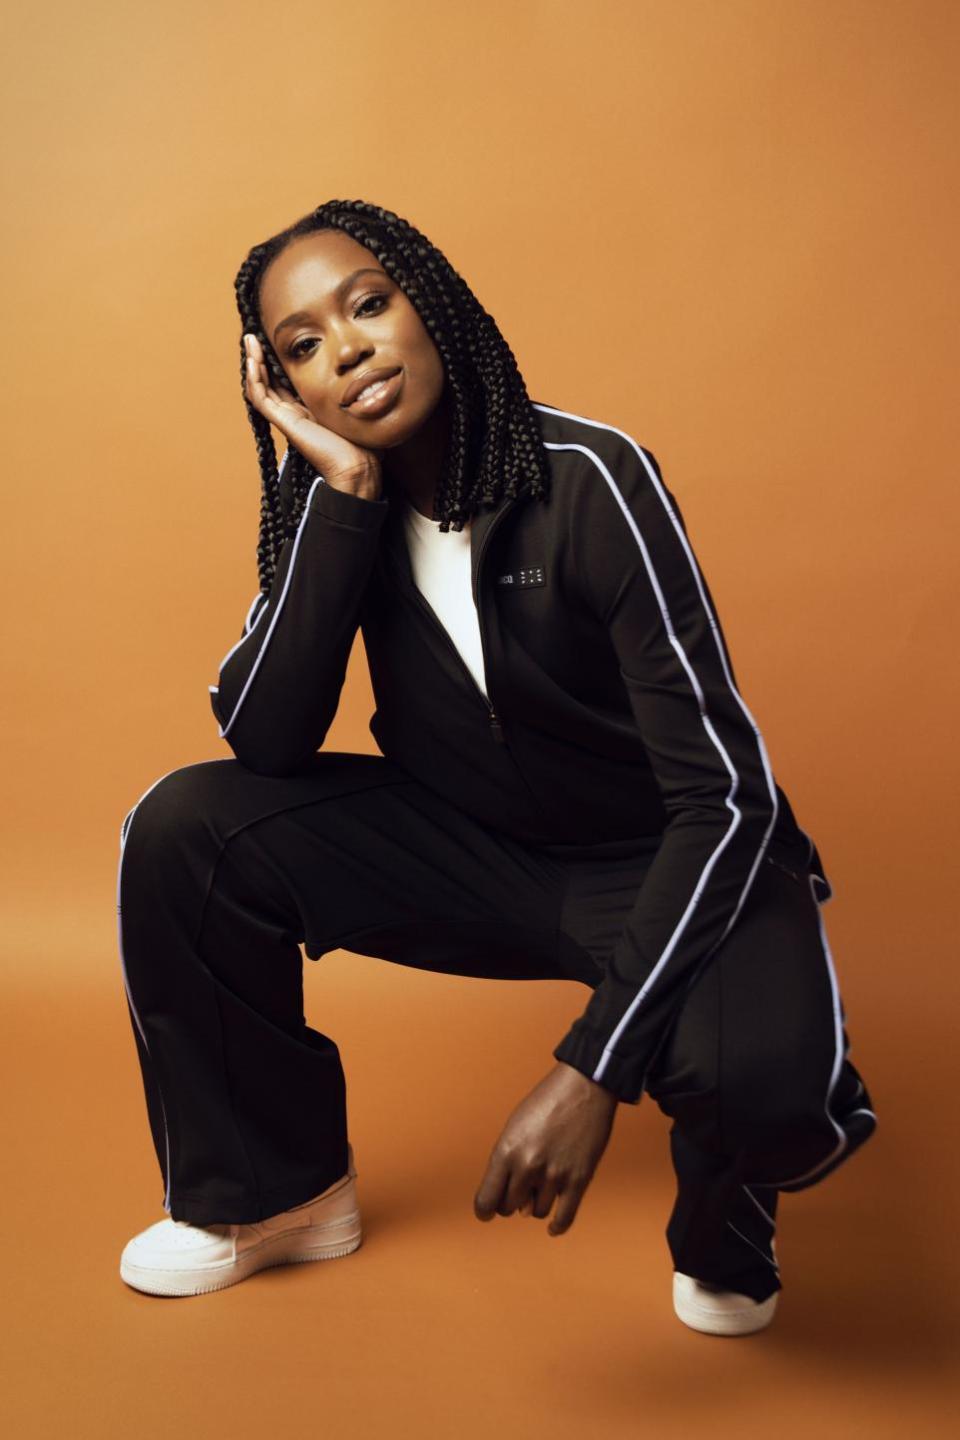 Blackheath singer Anthonia Edwards crowned winner of The Voice 2022